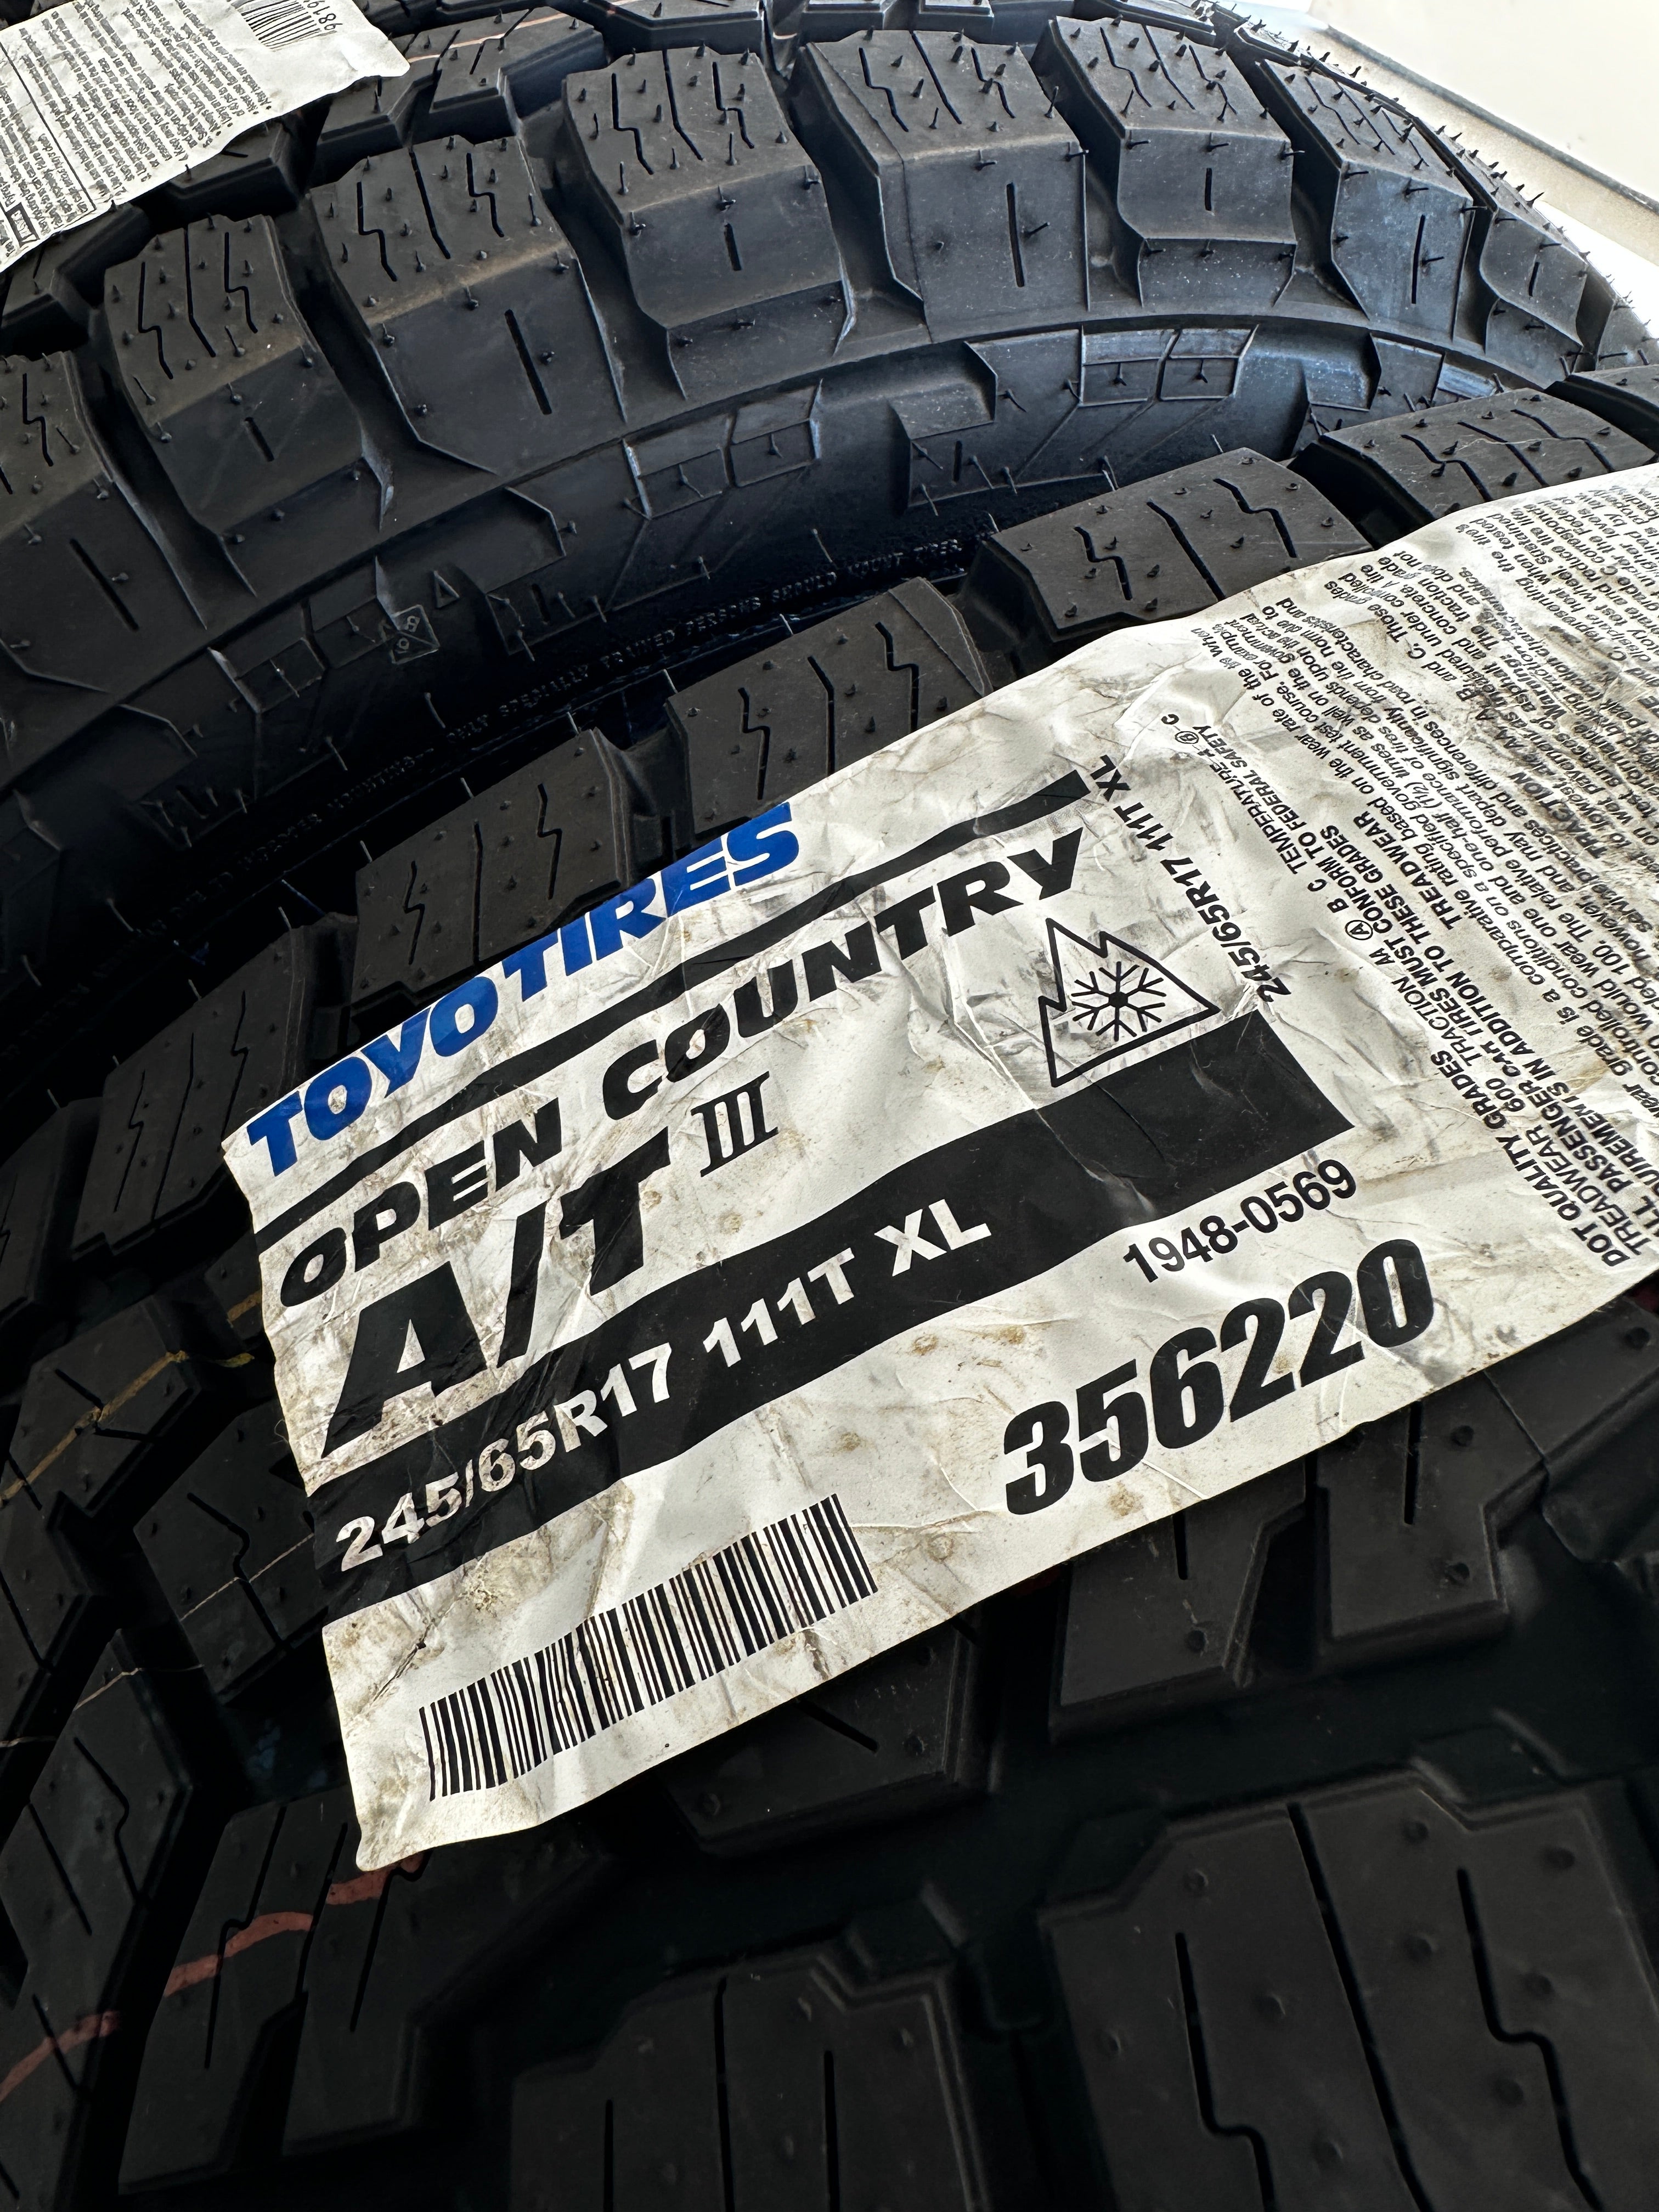 TOYO® OPEN COUNTRY A/T III - 245/65R17 111T